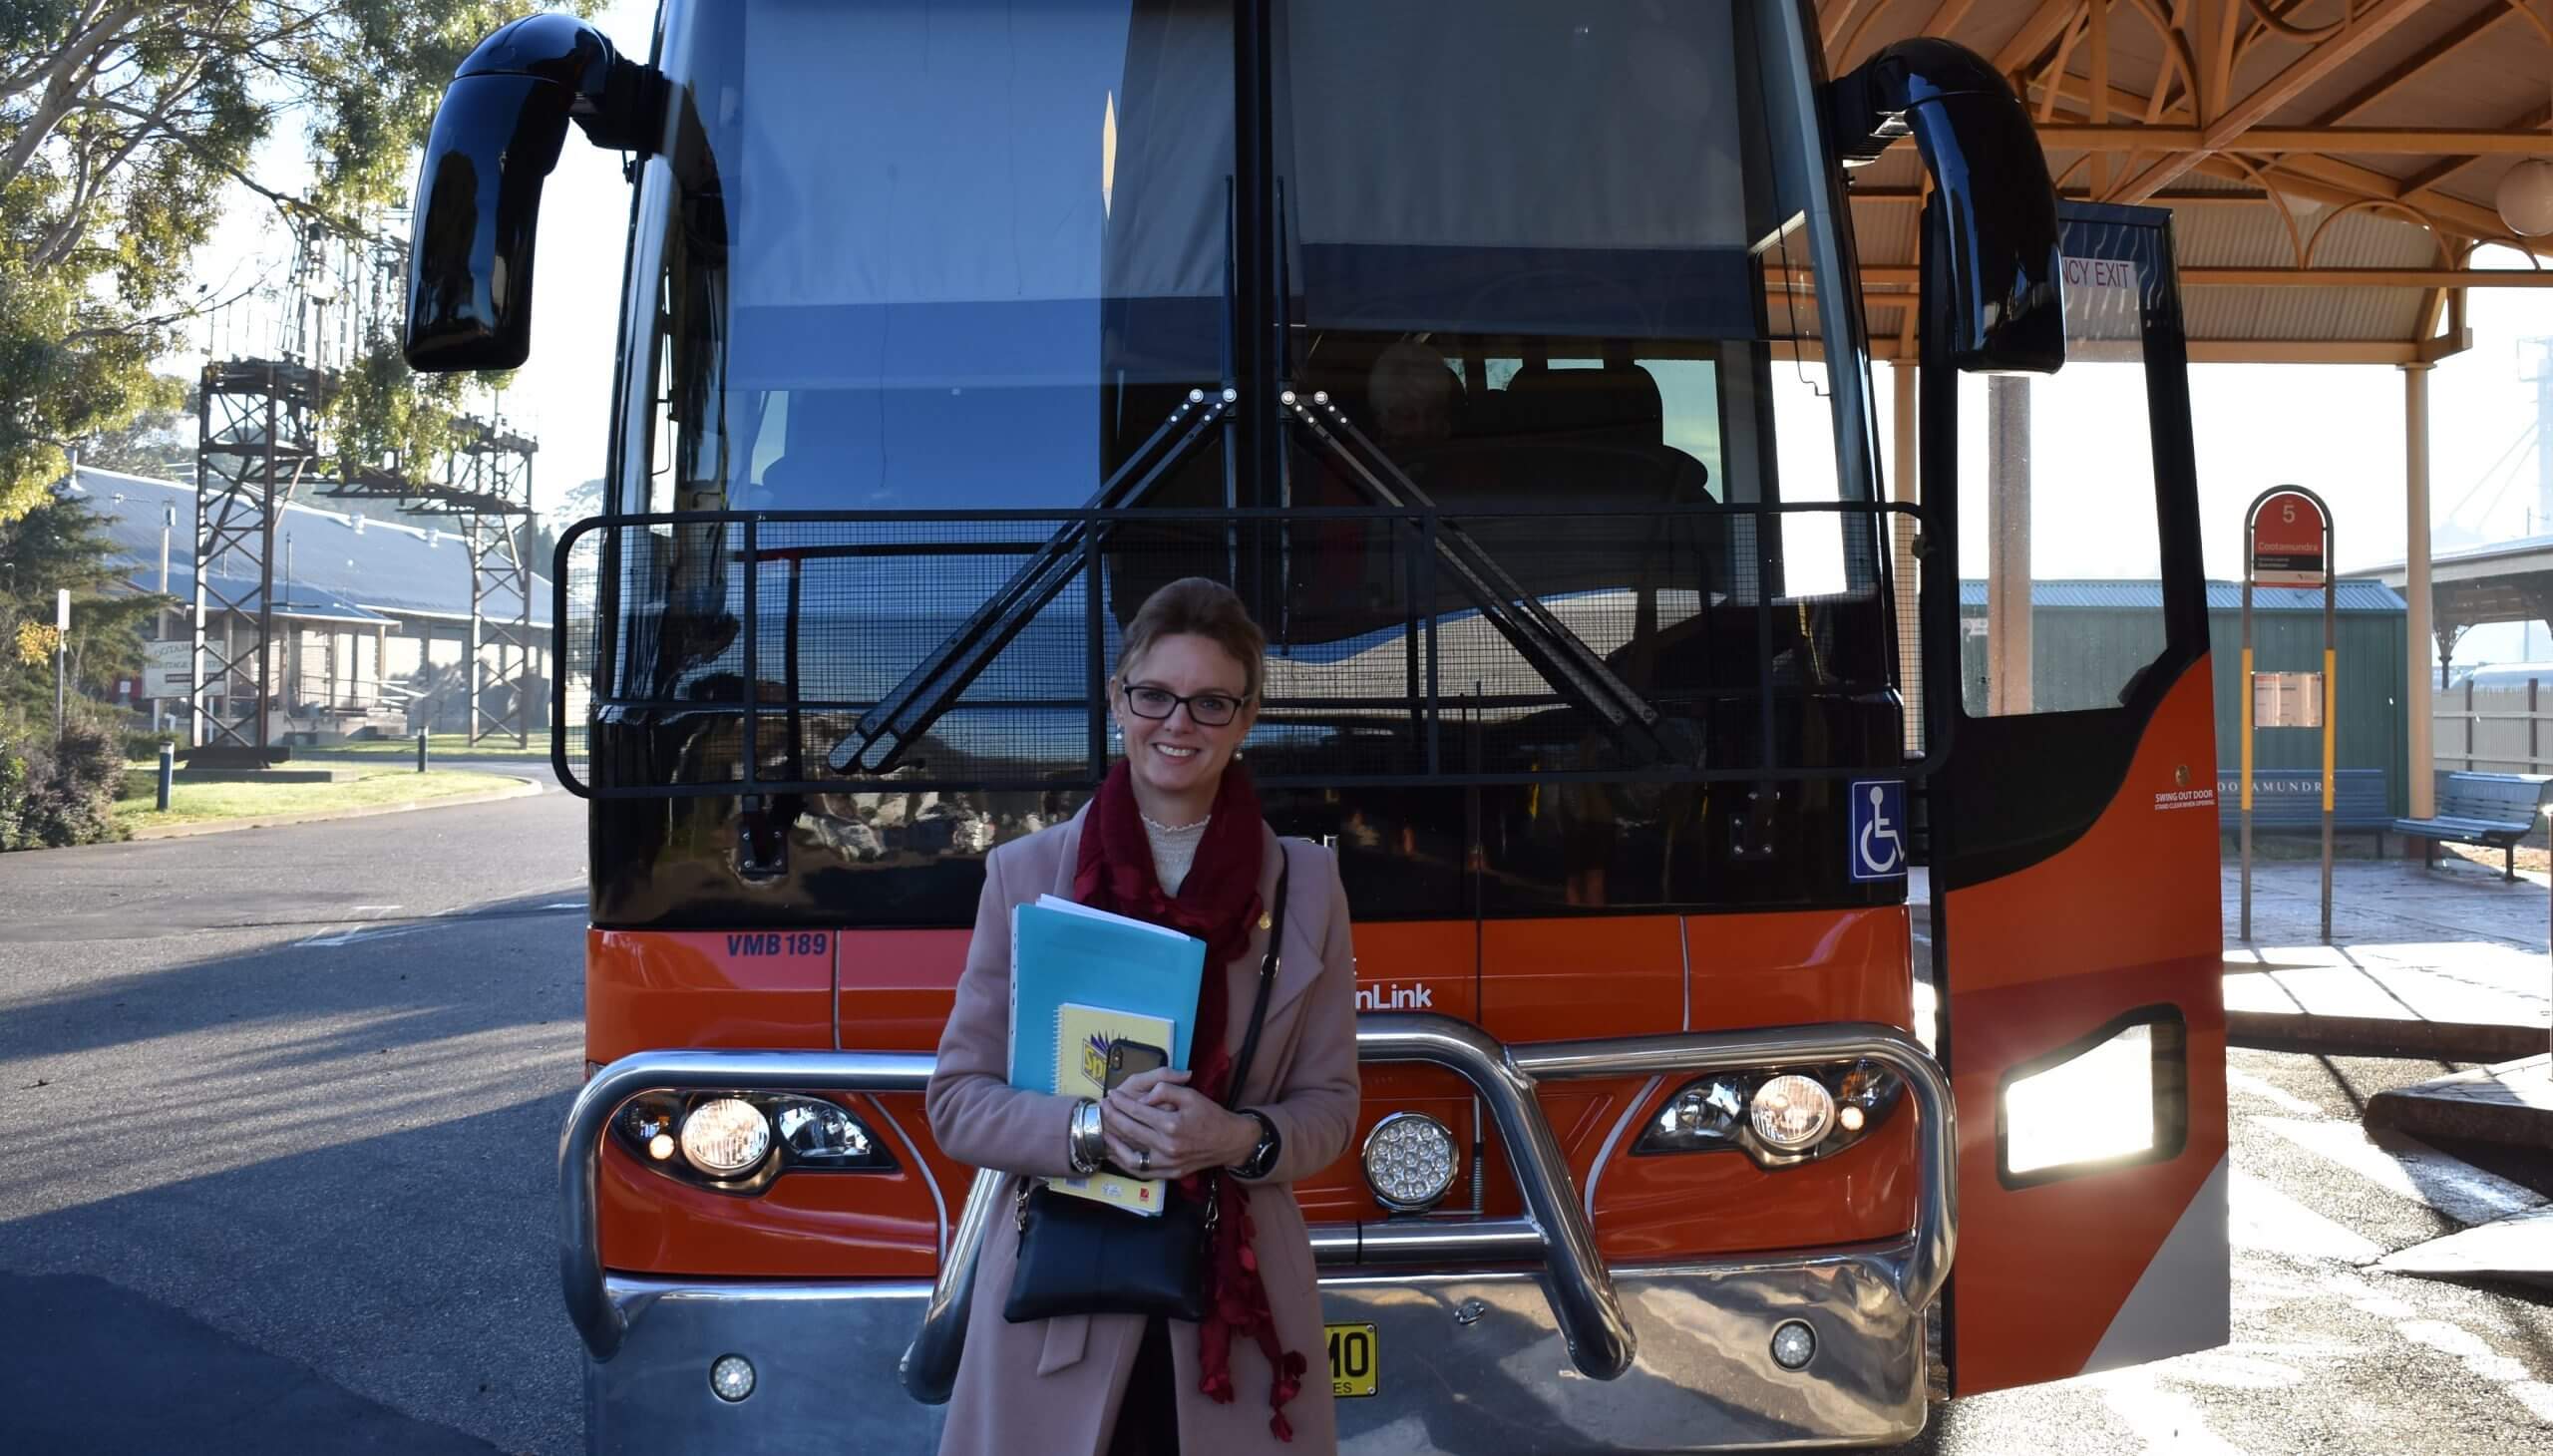 Steph Cooke MP stands in front of a red bus wearing caramel coat and red scarf whilst holding documents and folders. The bus is parked outside a bus shelter with some steel infrastructure in background